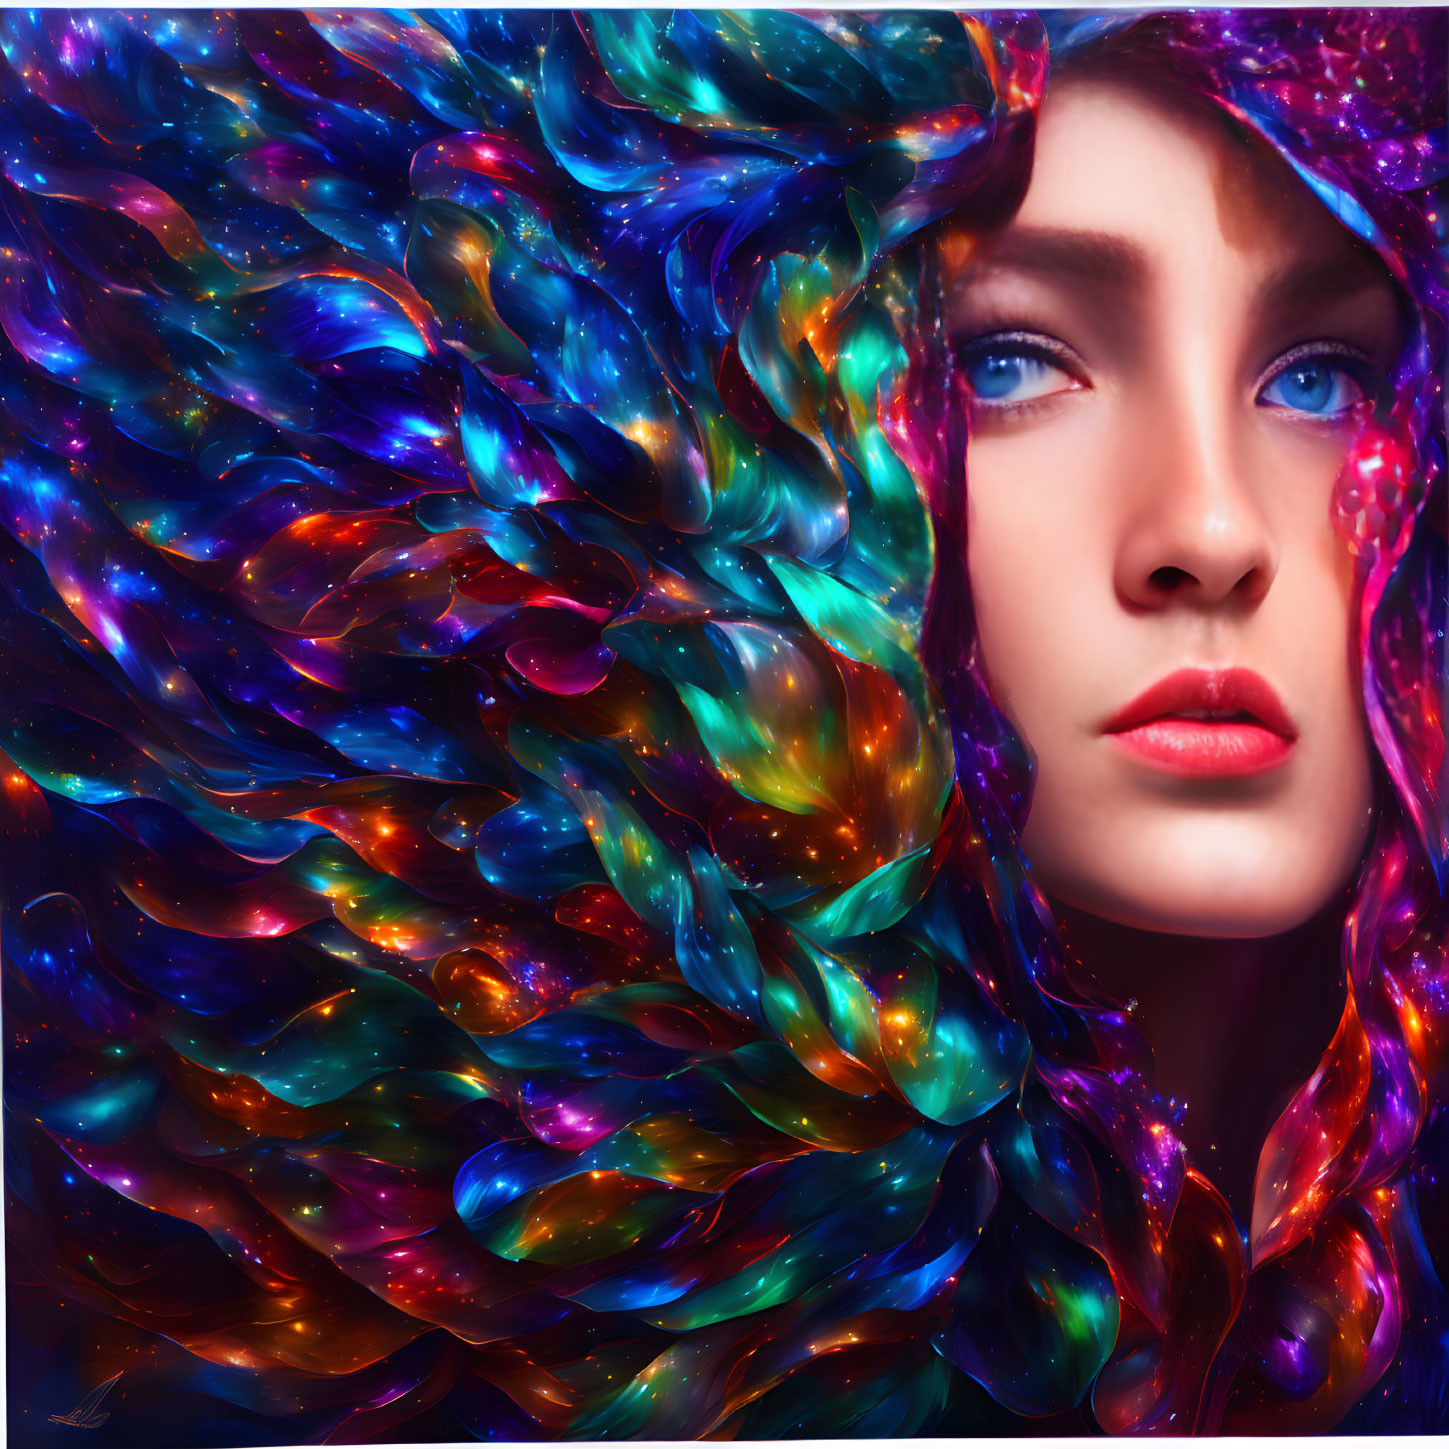 Woman with Striking Blue Eyes Surrounded by Vibrant, Iridescent Shapes